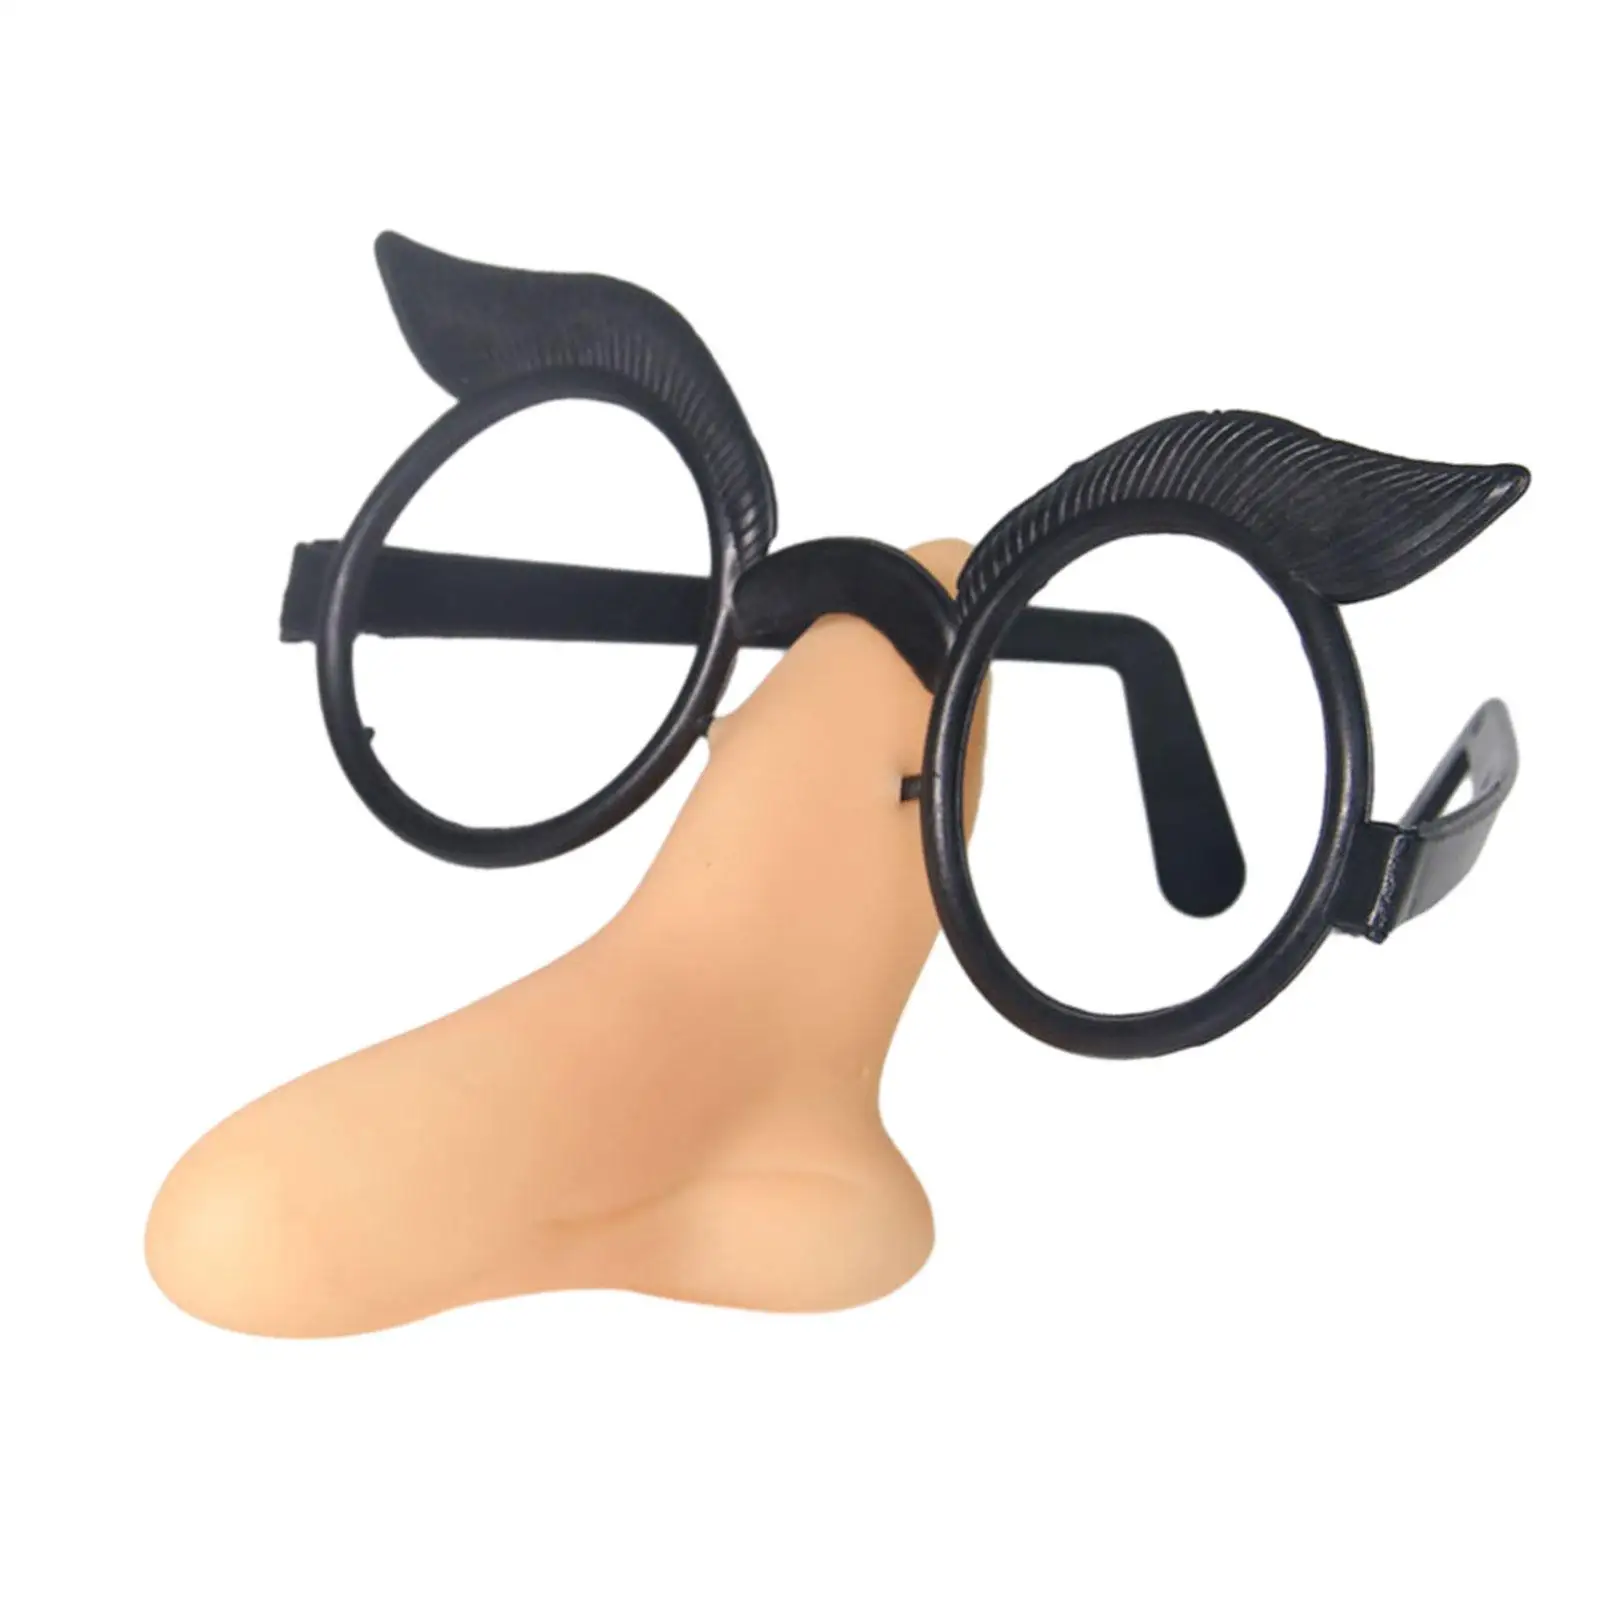 Witch Nose with Glasses Women Glasses Eyewear Decorative Glasses for Masquerade Birthday Party Favors Halloween Decoration